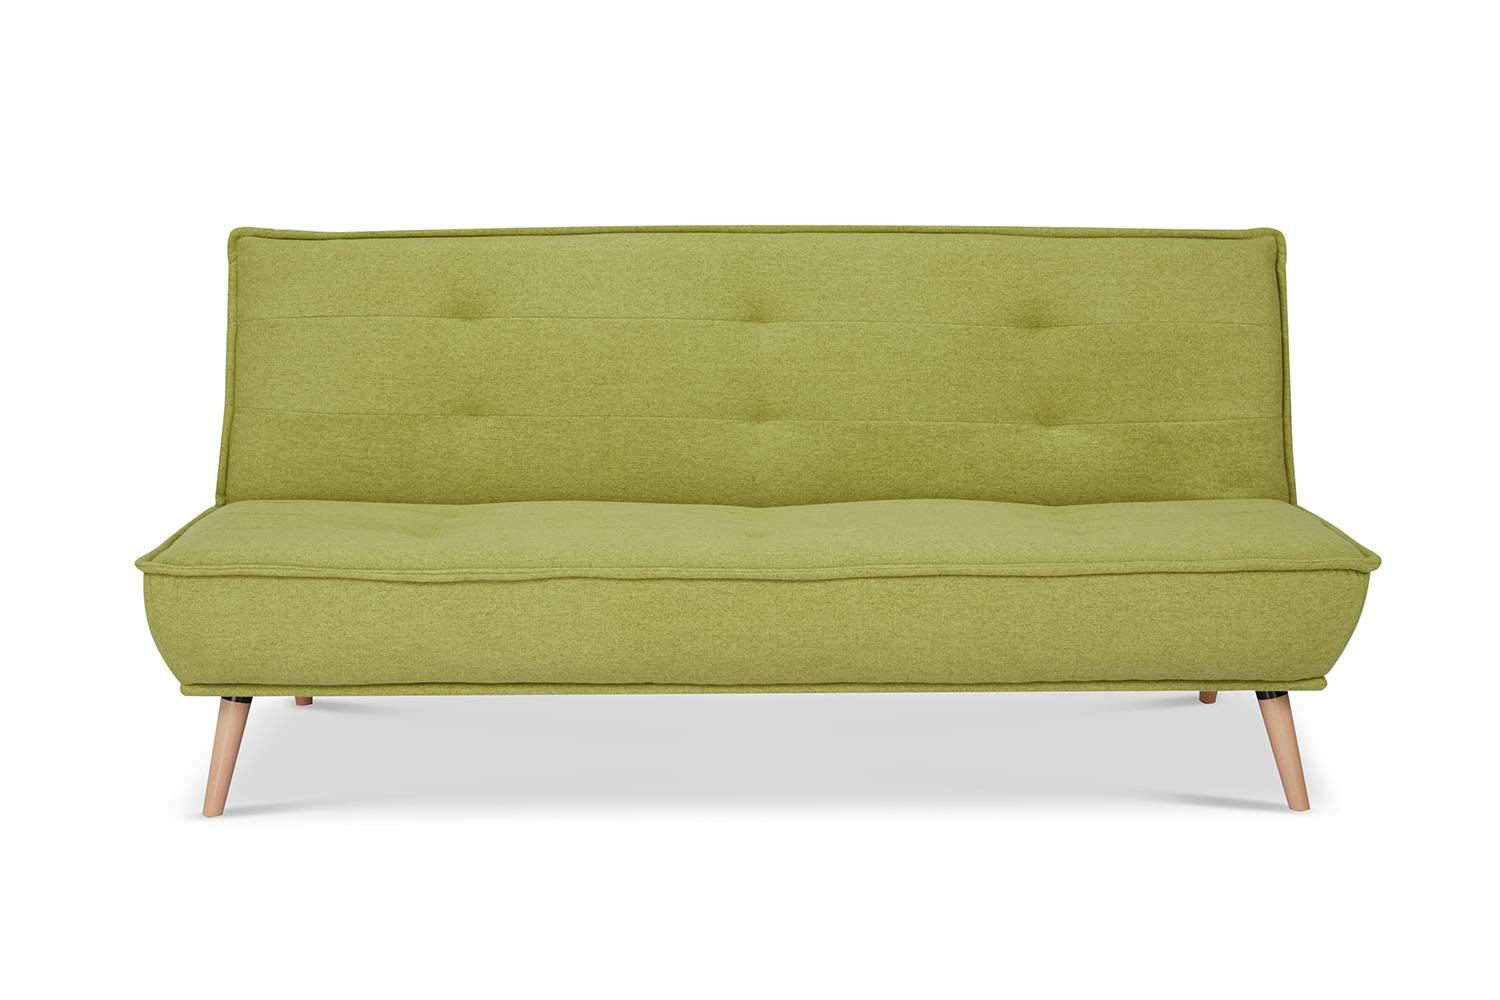 cheap on sale on clerence sofa bed